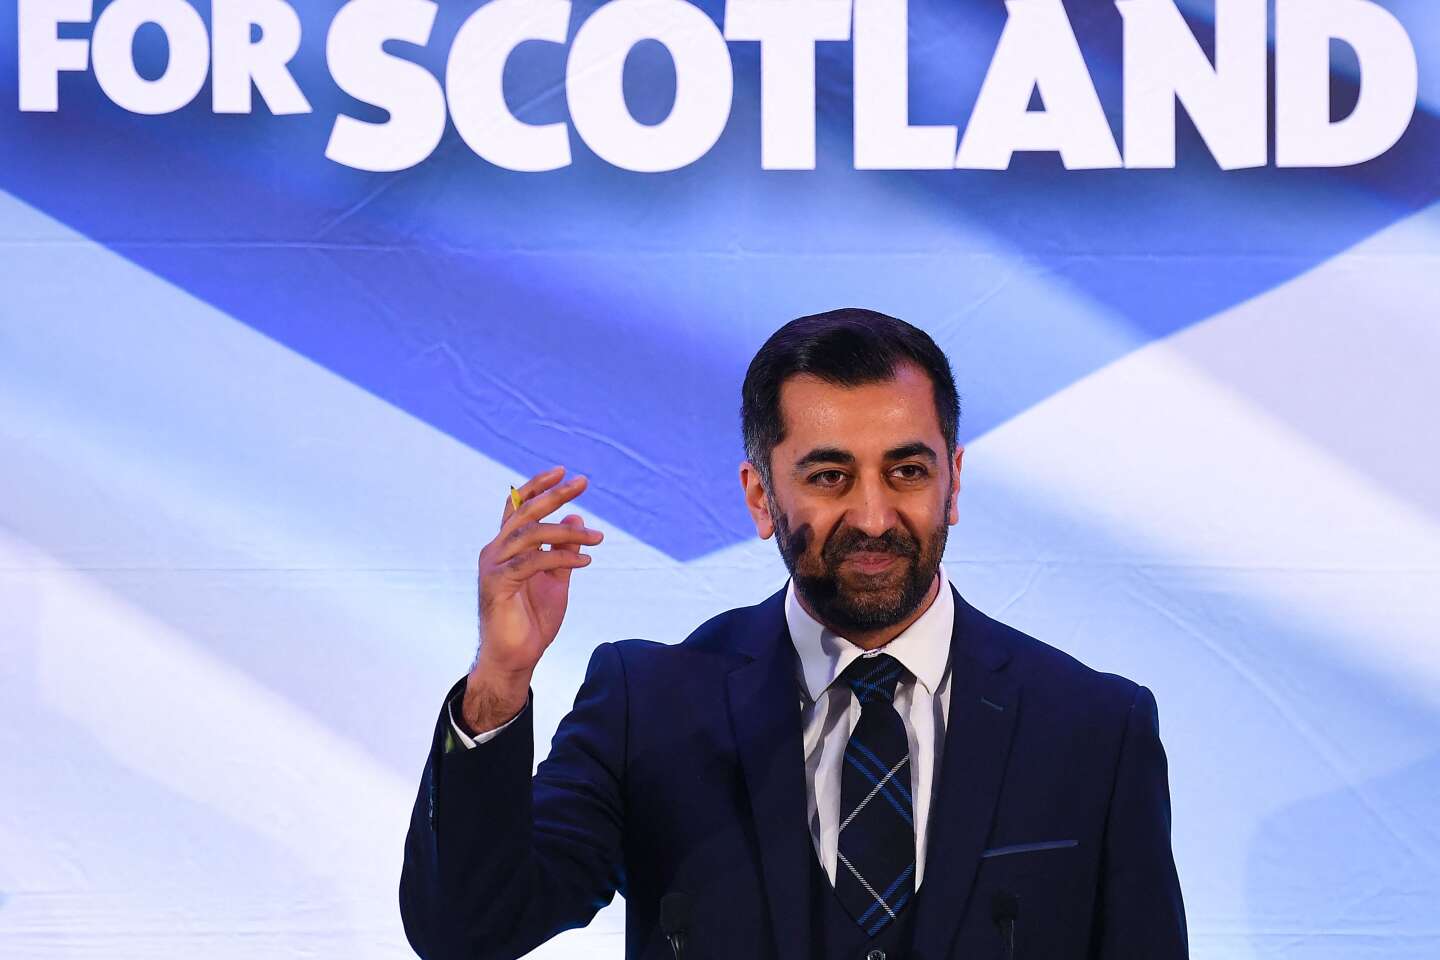 In Scotland, Humza Yousaf elected by the separatists to become the new Prime Minister